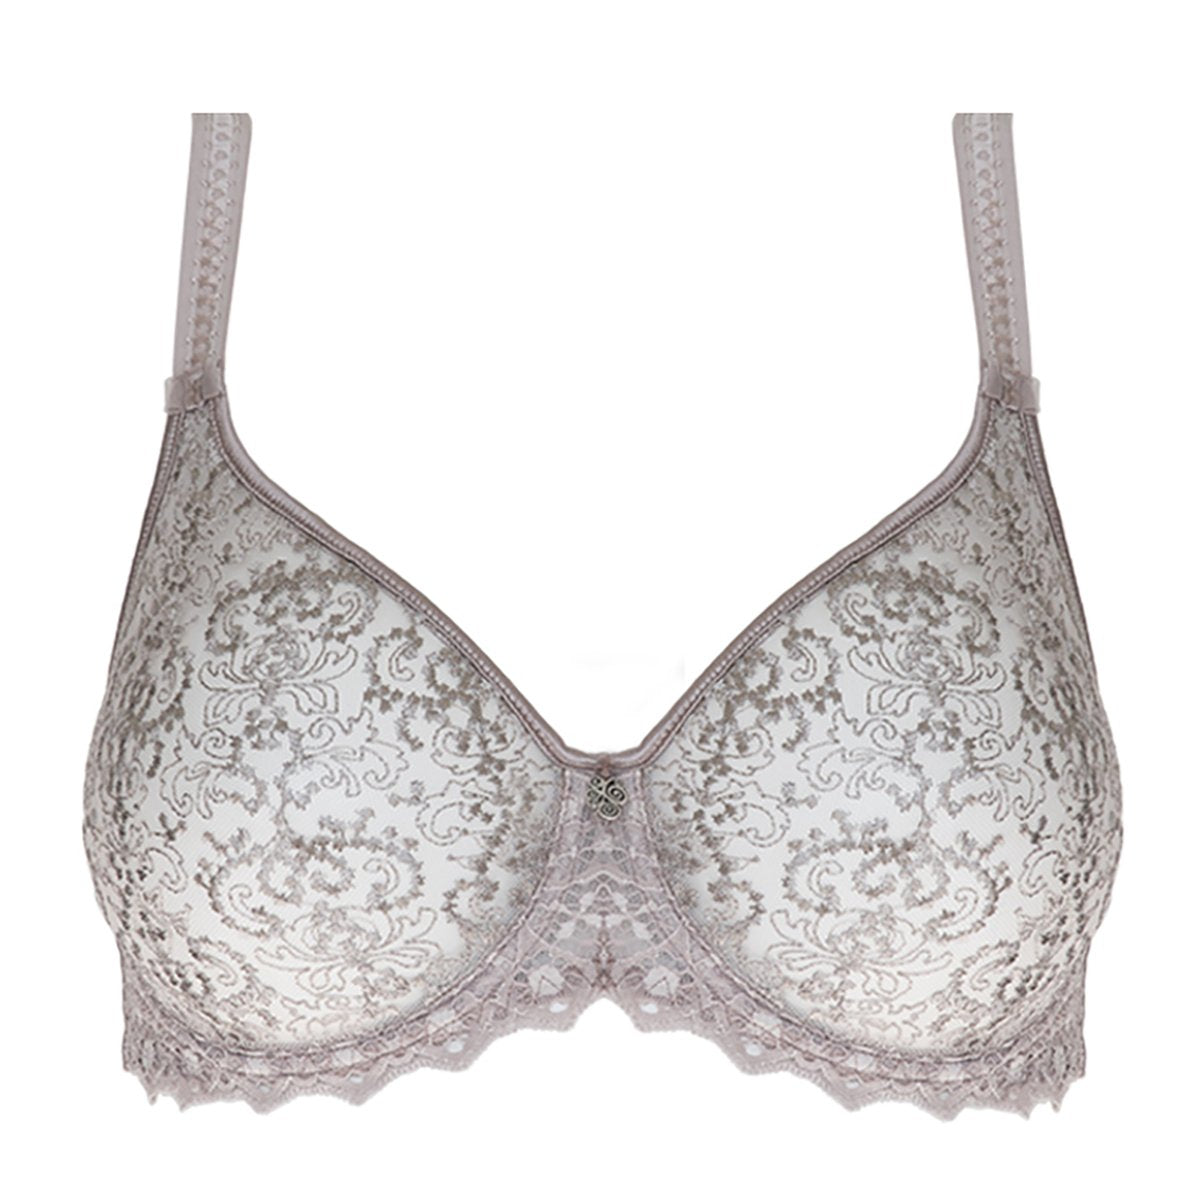 Empreinte cassiopee lace bra how should a bra fit french lingerie canada linea intima rose sauvage nude